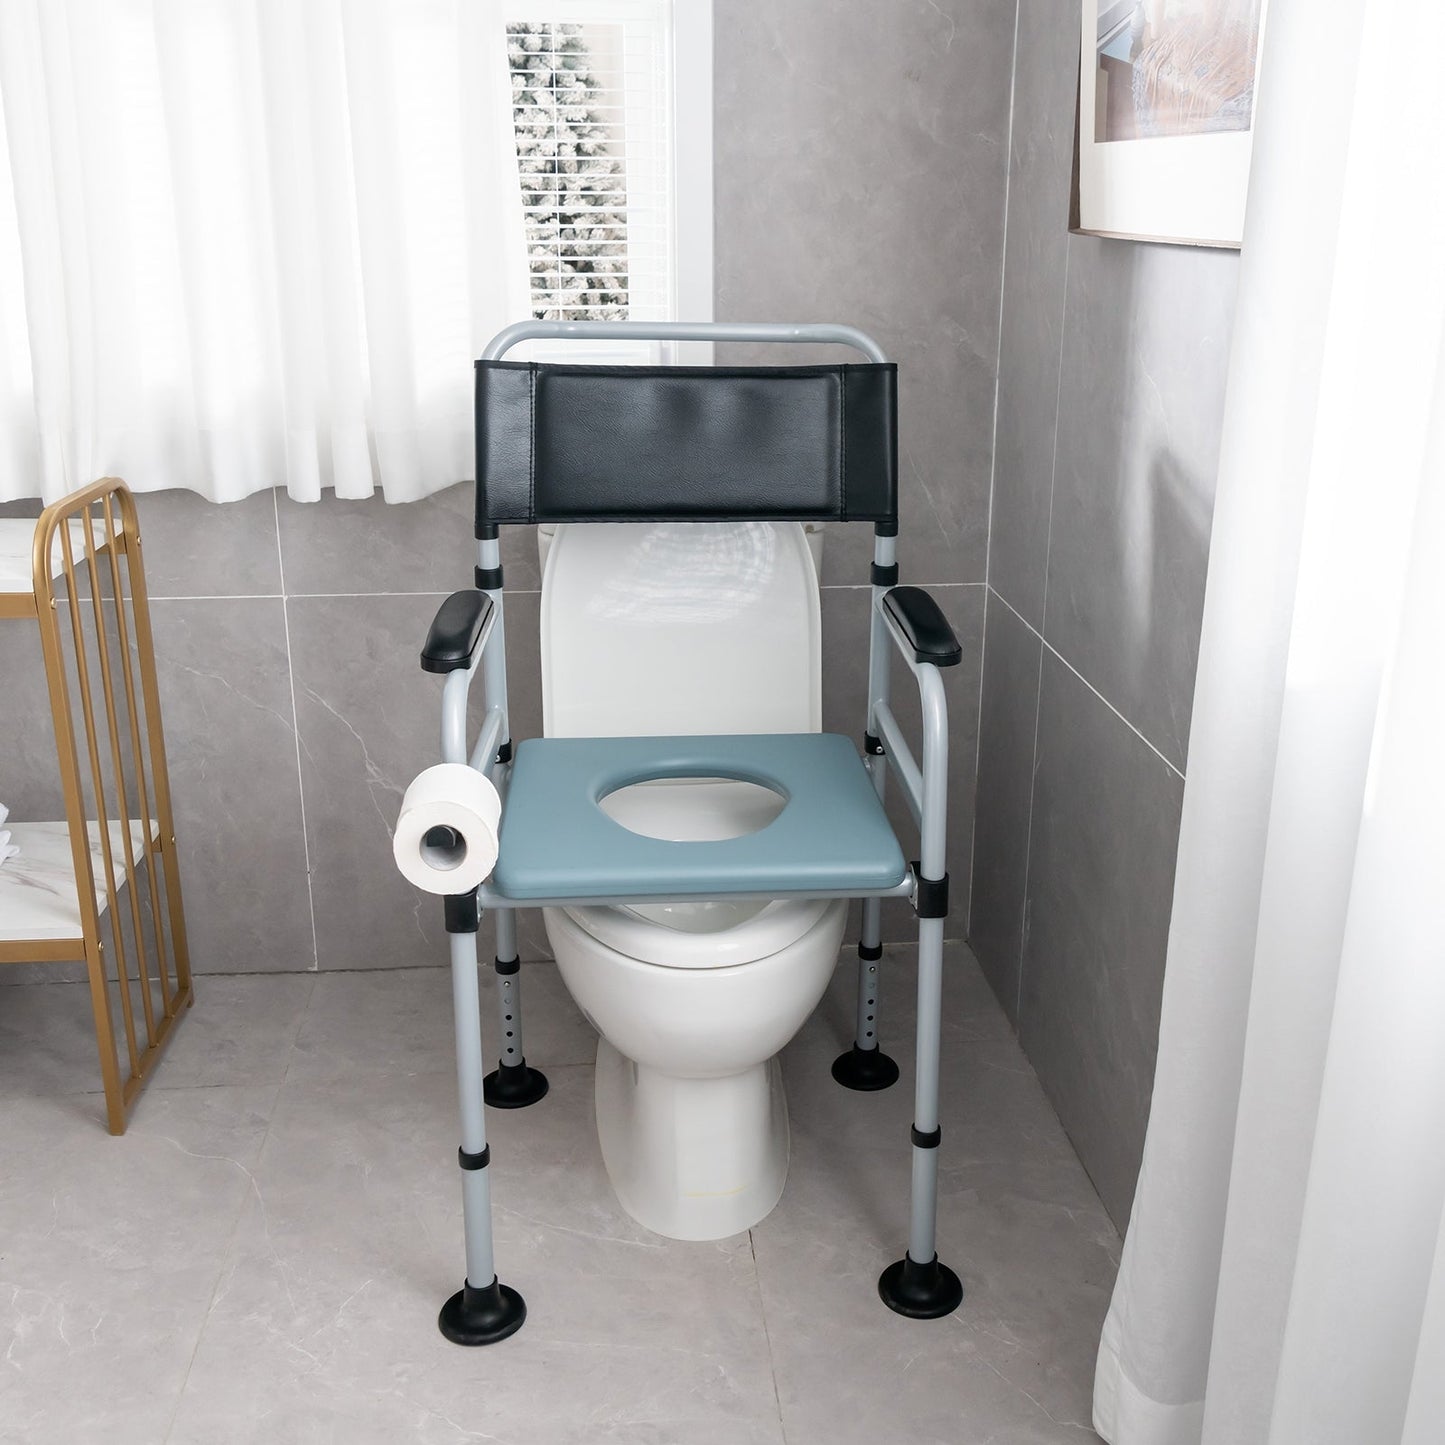 4-in-1 Folding Bedside Commode Chair with Detachable Bucket and Towel Holder at Gallery Canada